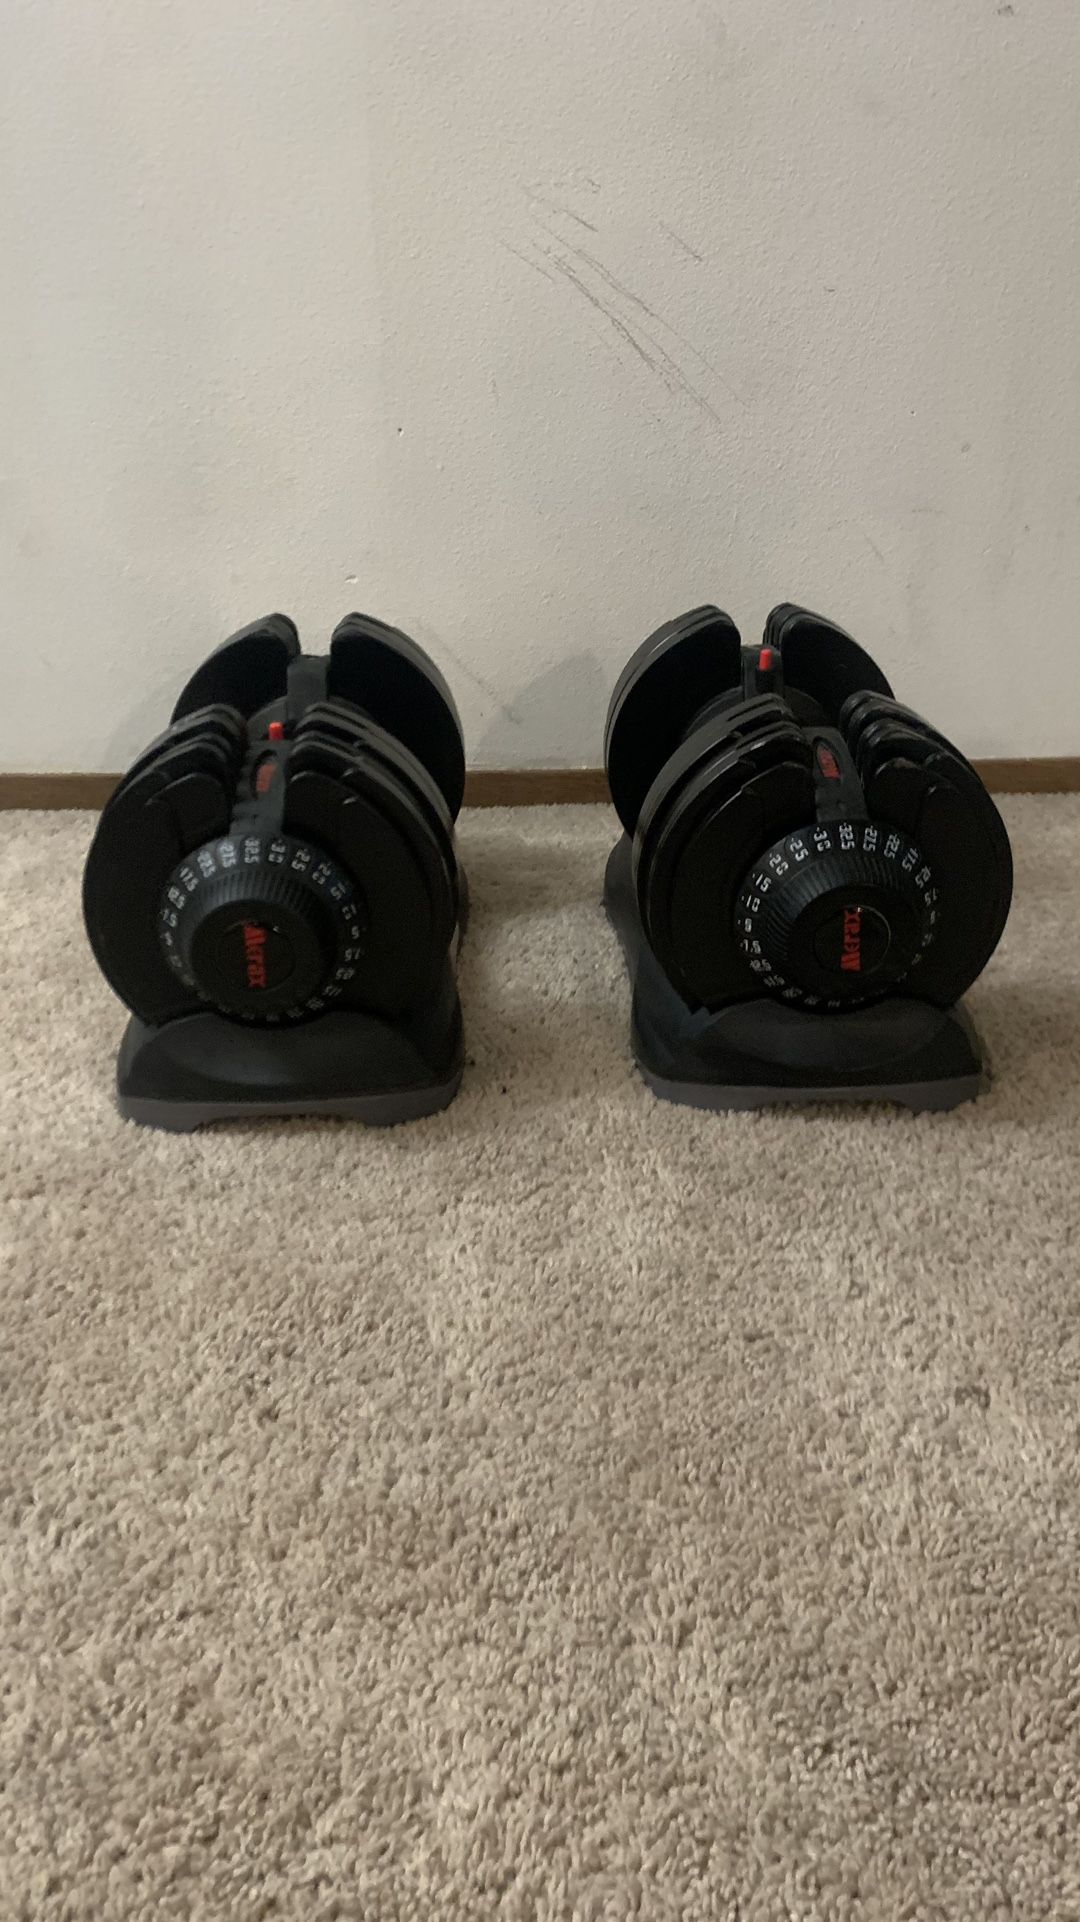 Merax Adjustable Dumbbells (11 Pounds to 71.5 Pounds each Dumbbell)